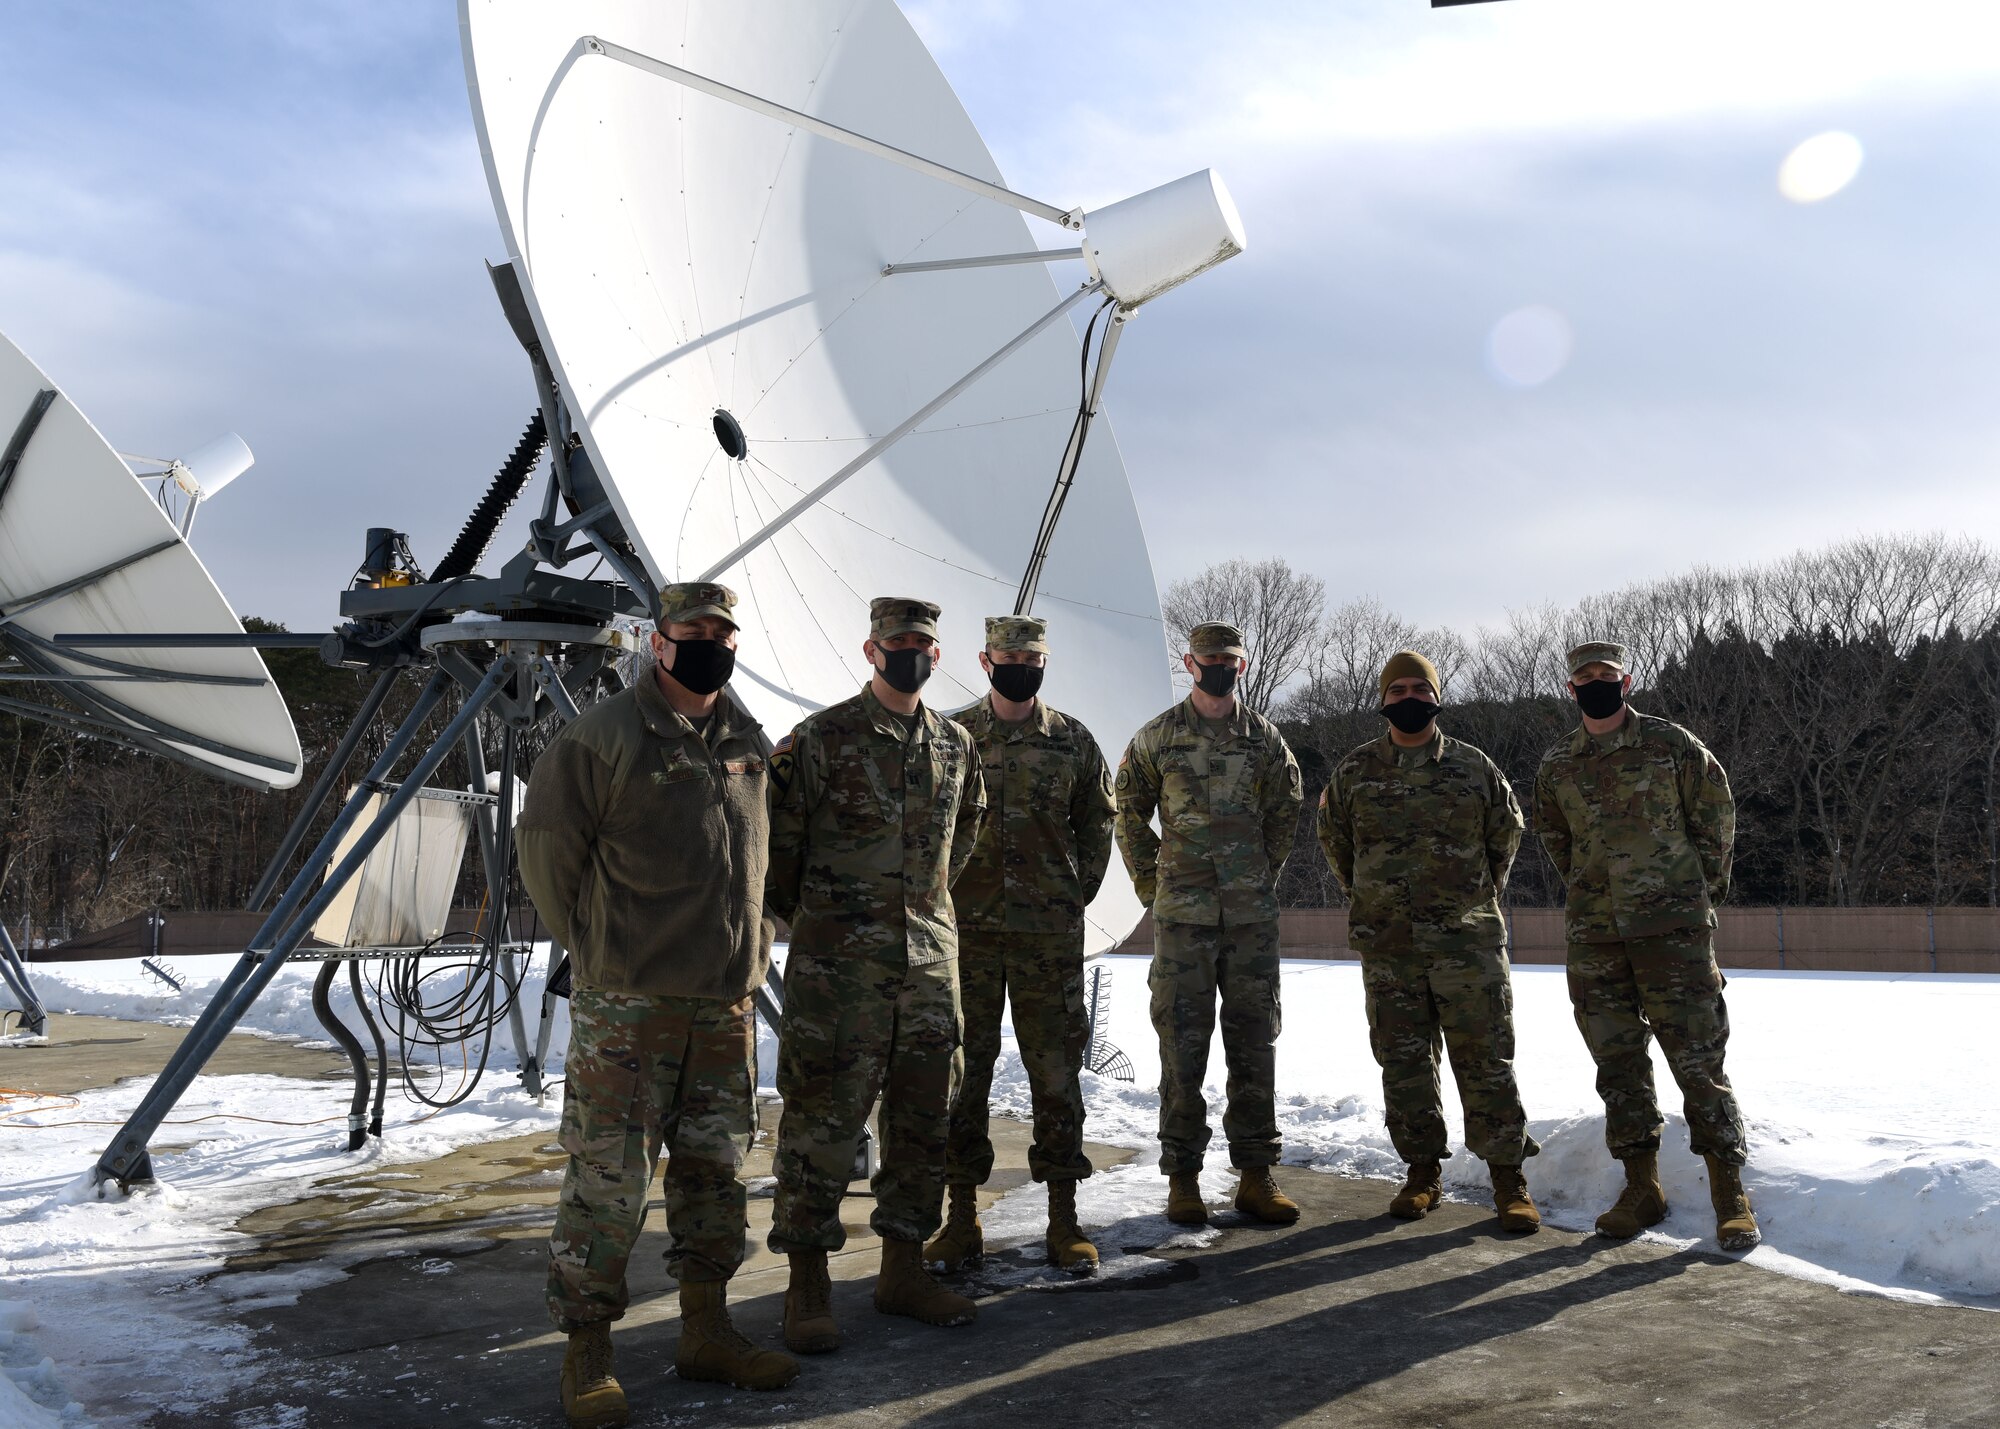 Individuals stand in front of a radar for a group photo outside during winter